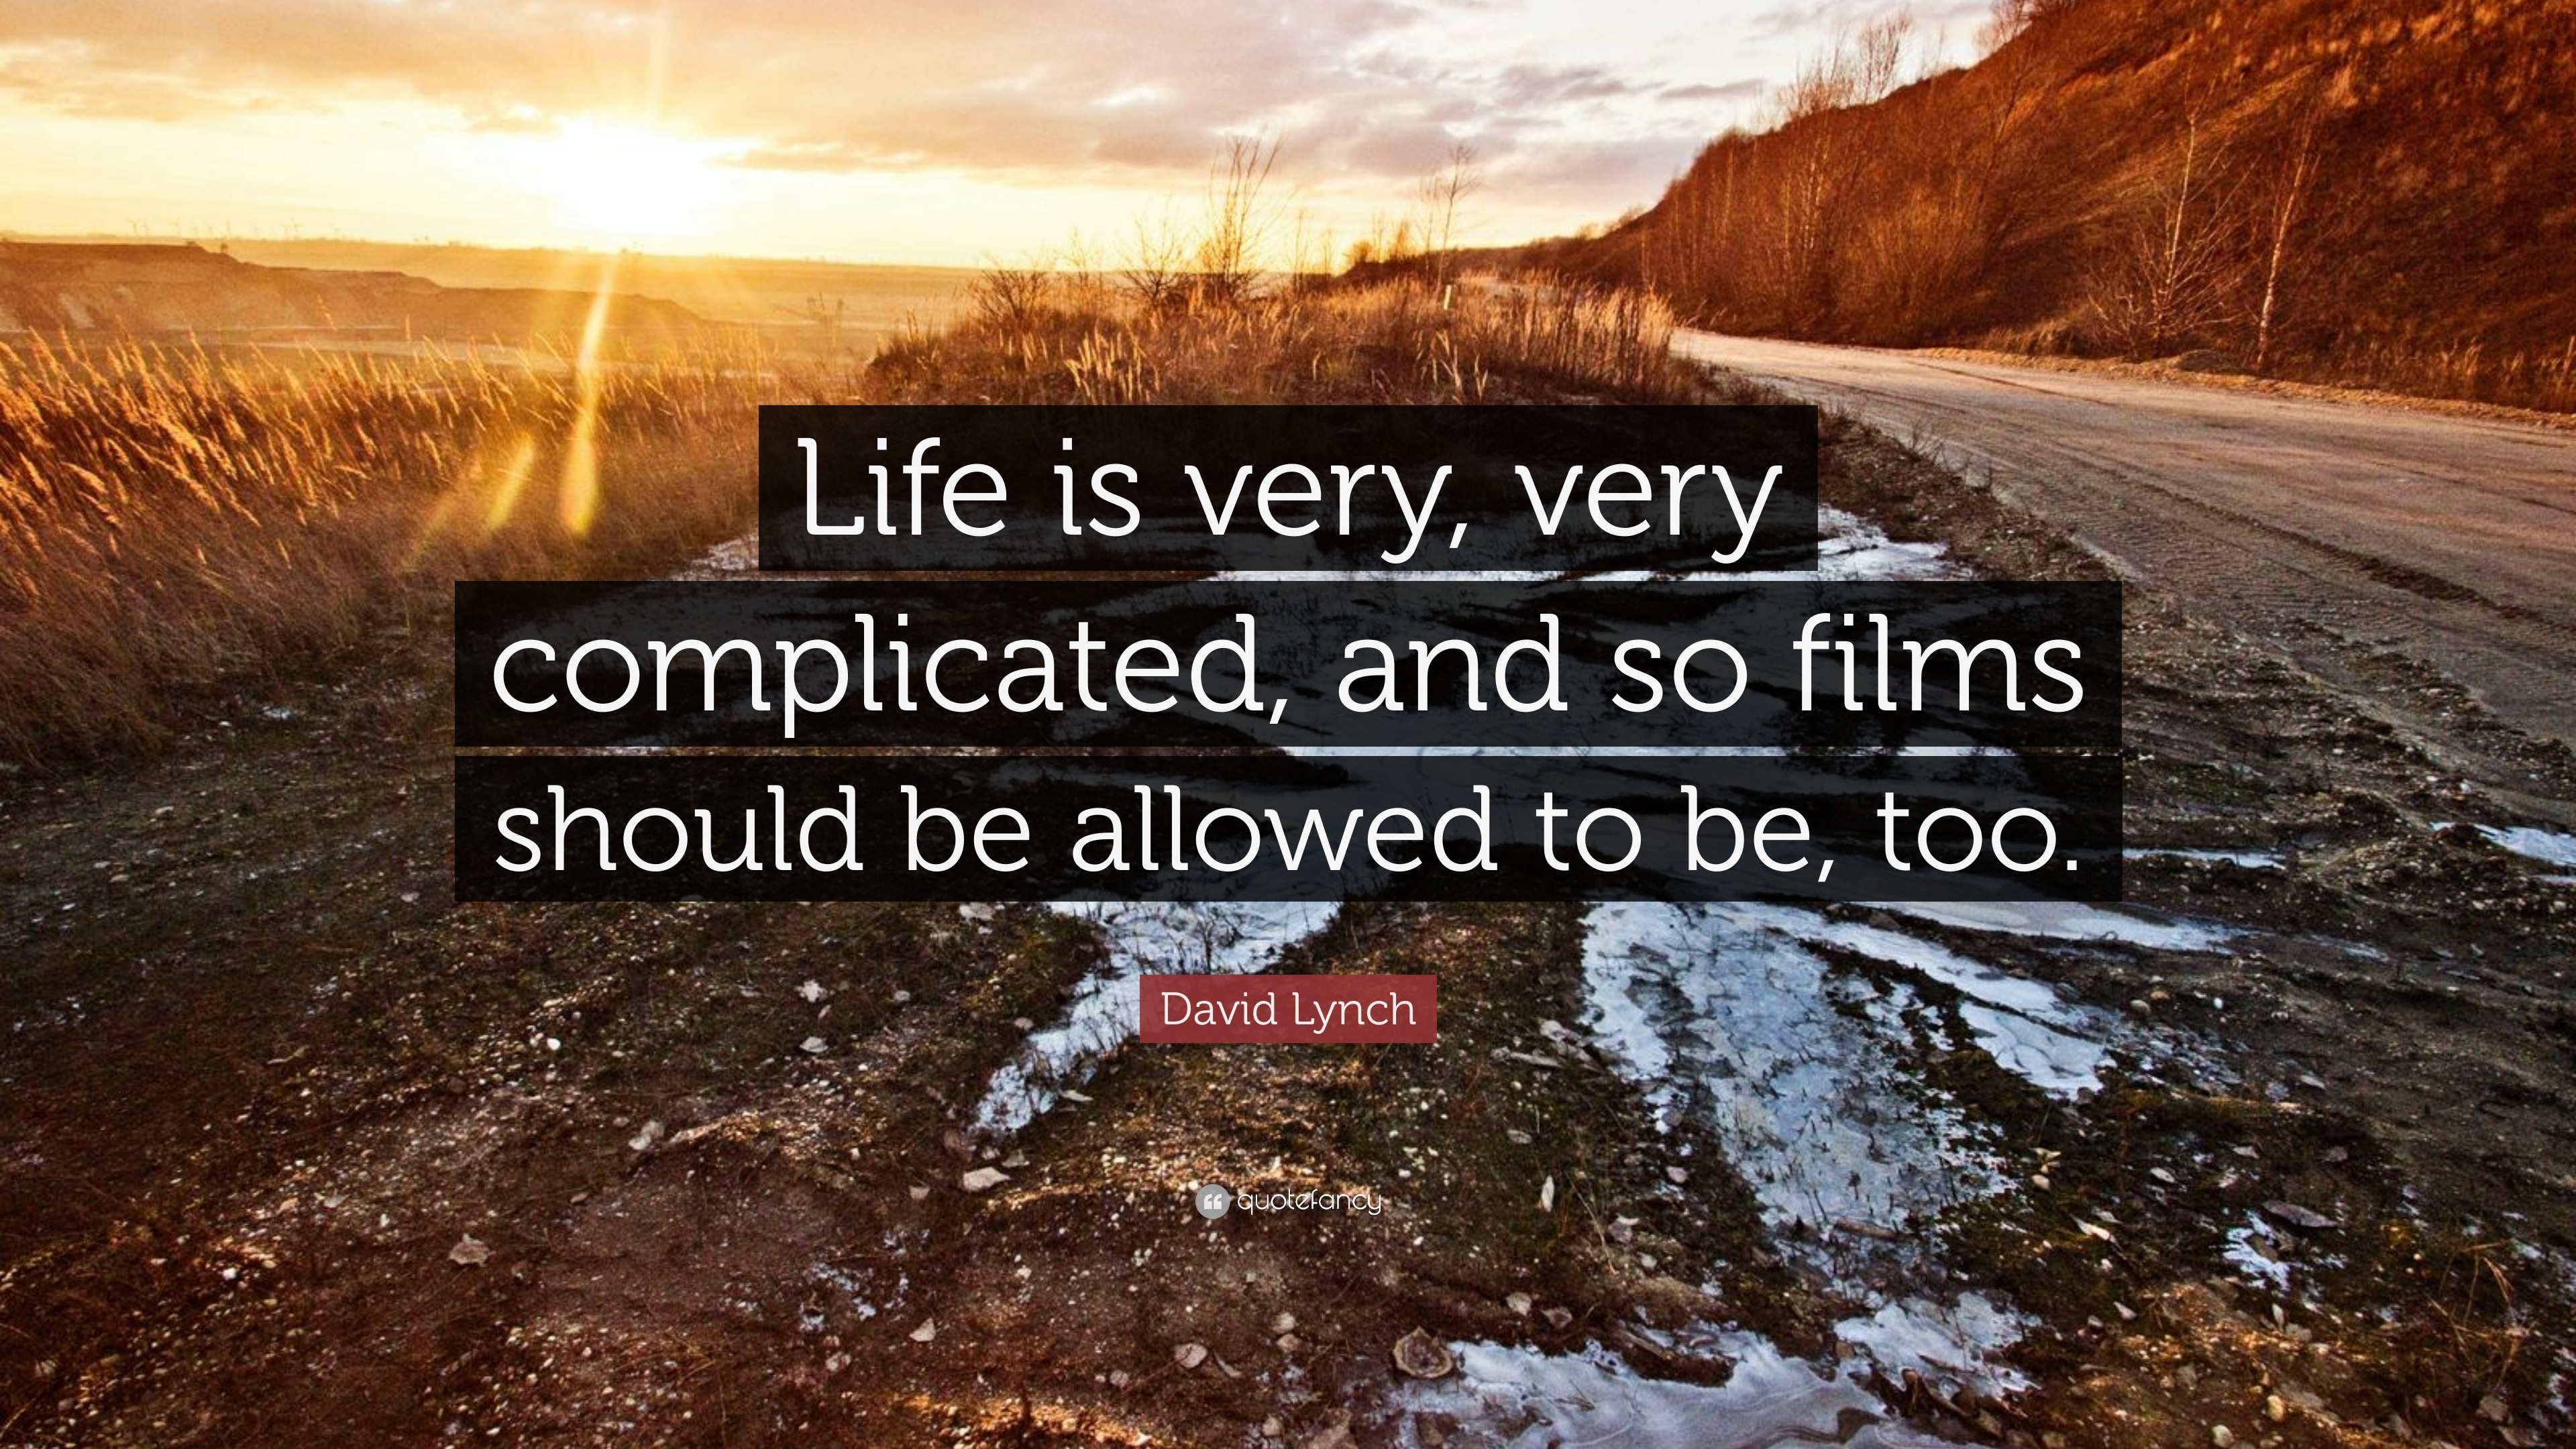 David Lynch Quote “Life is very, very complicated, and so films should